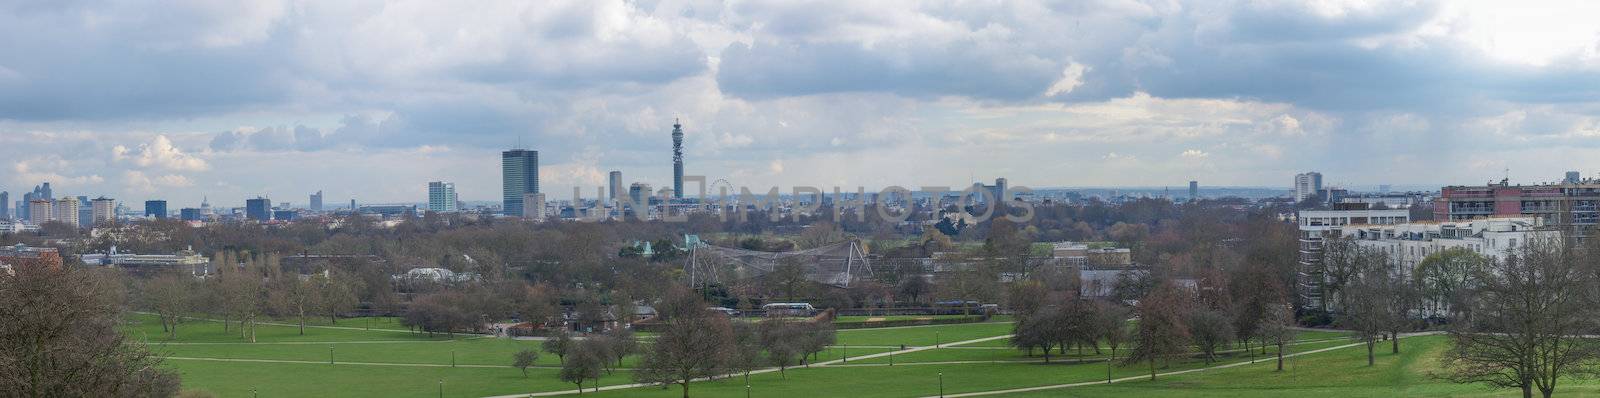 London panorama seen from Primrose Hill in London England UK